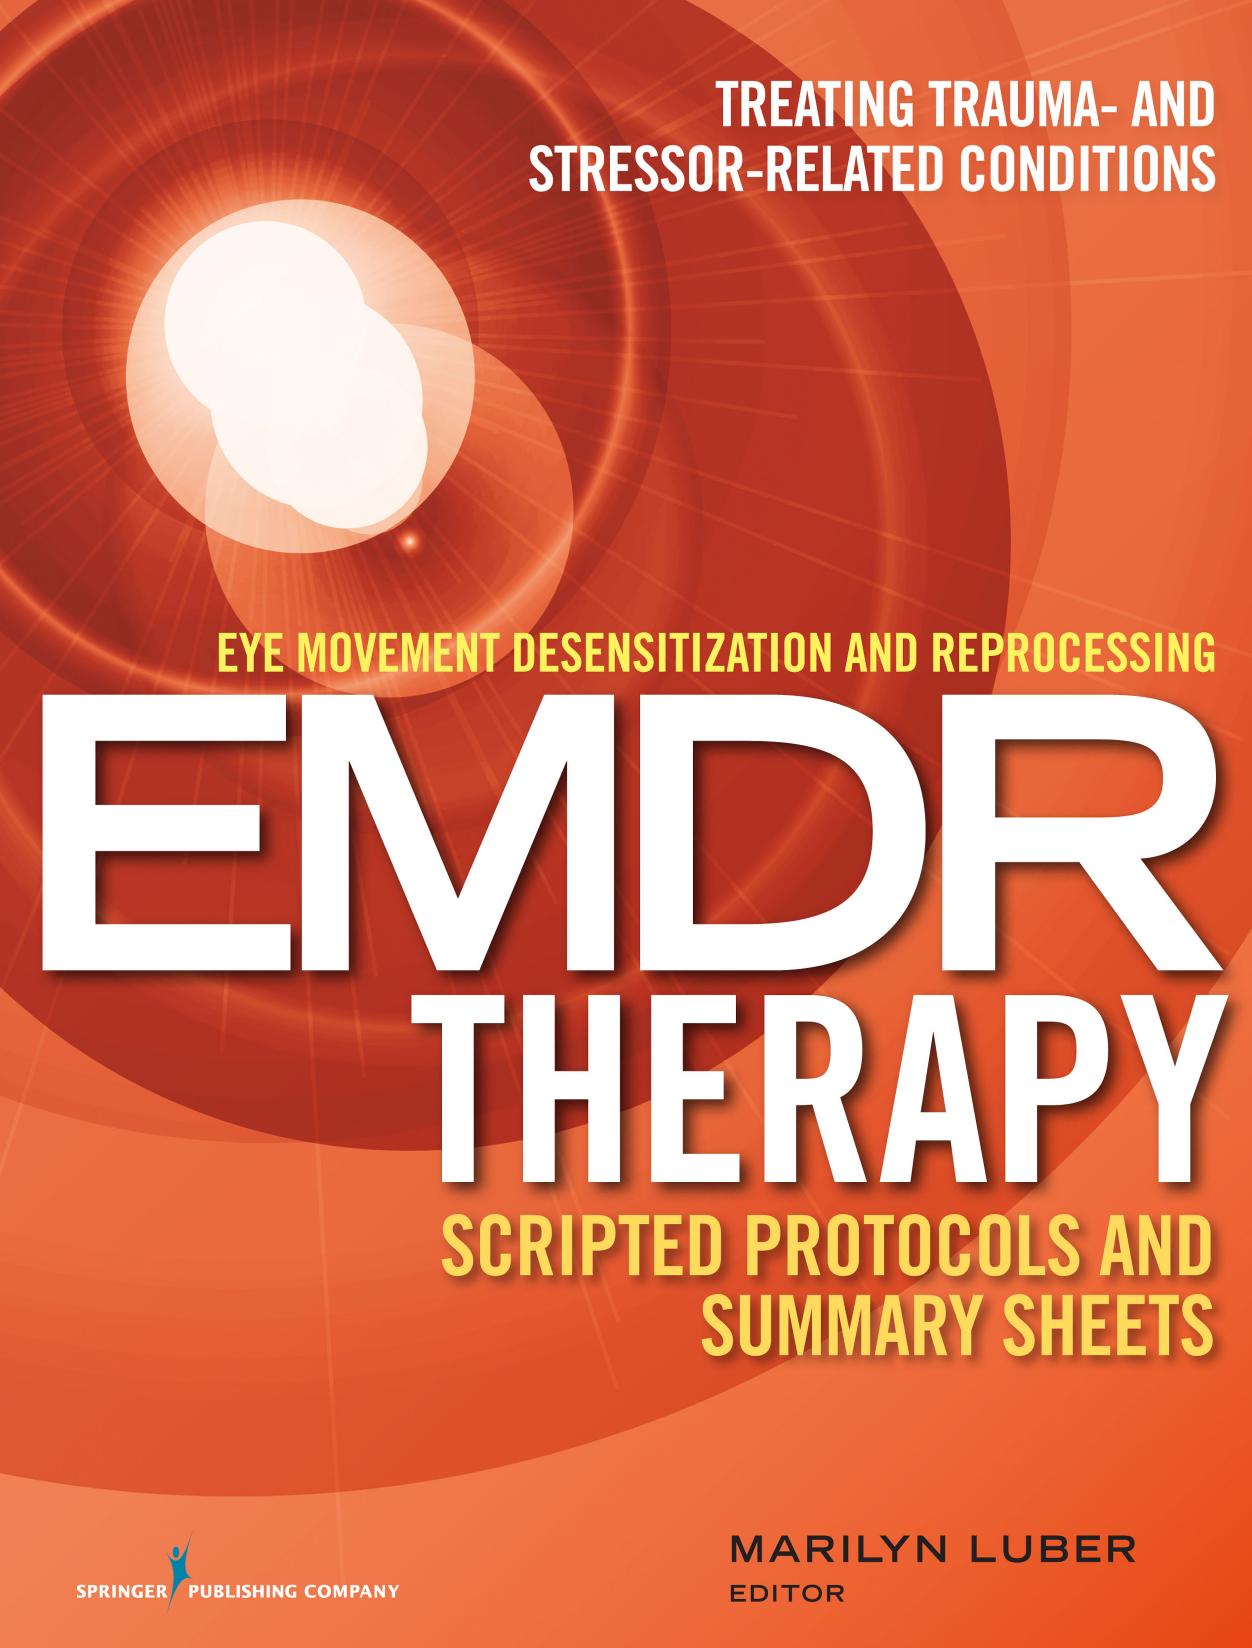 Eye Movement Desensitization and Reprocessing (EMDR) Therapy Scripted Protocols and Summary Sheets: Treating Trauma- and Stressor-Related Conditions